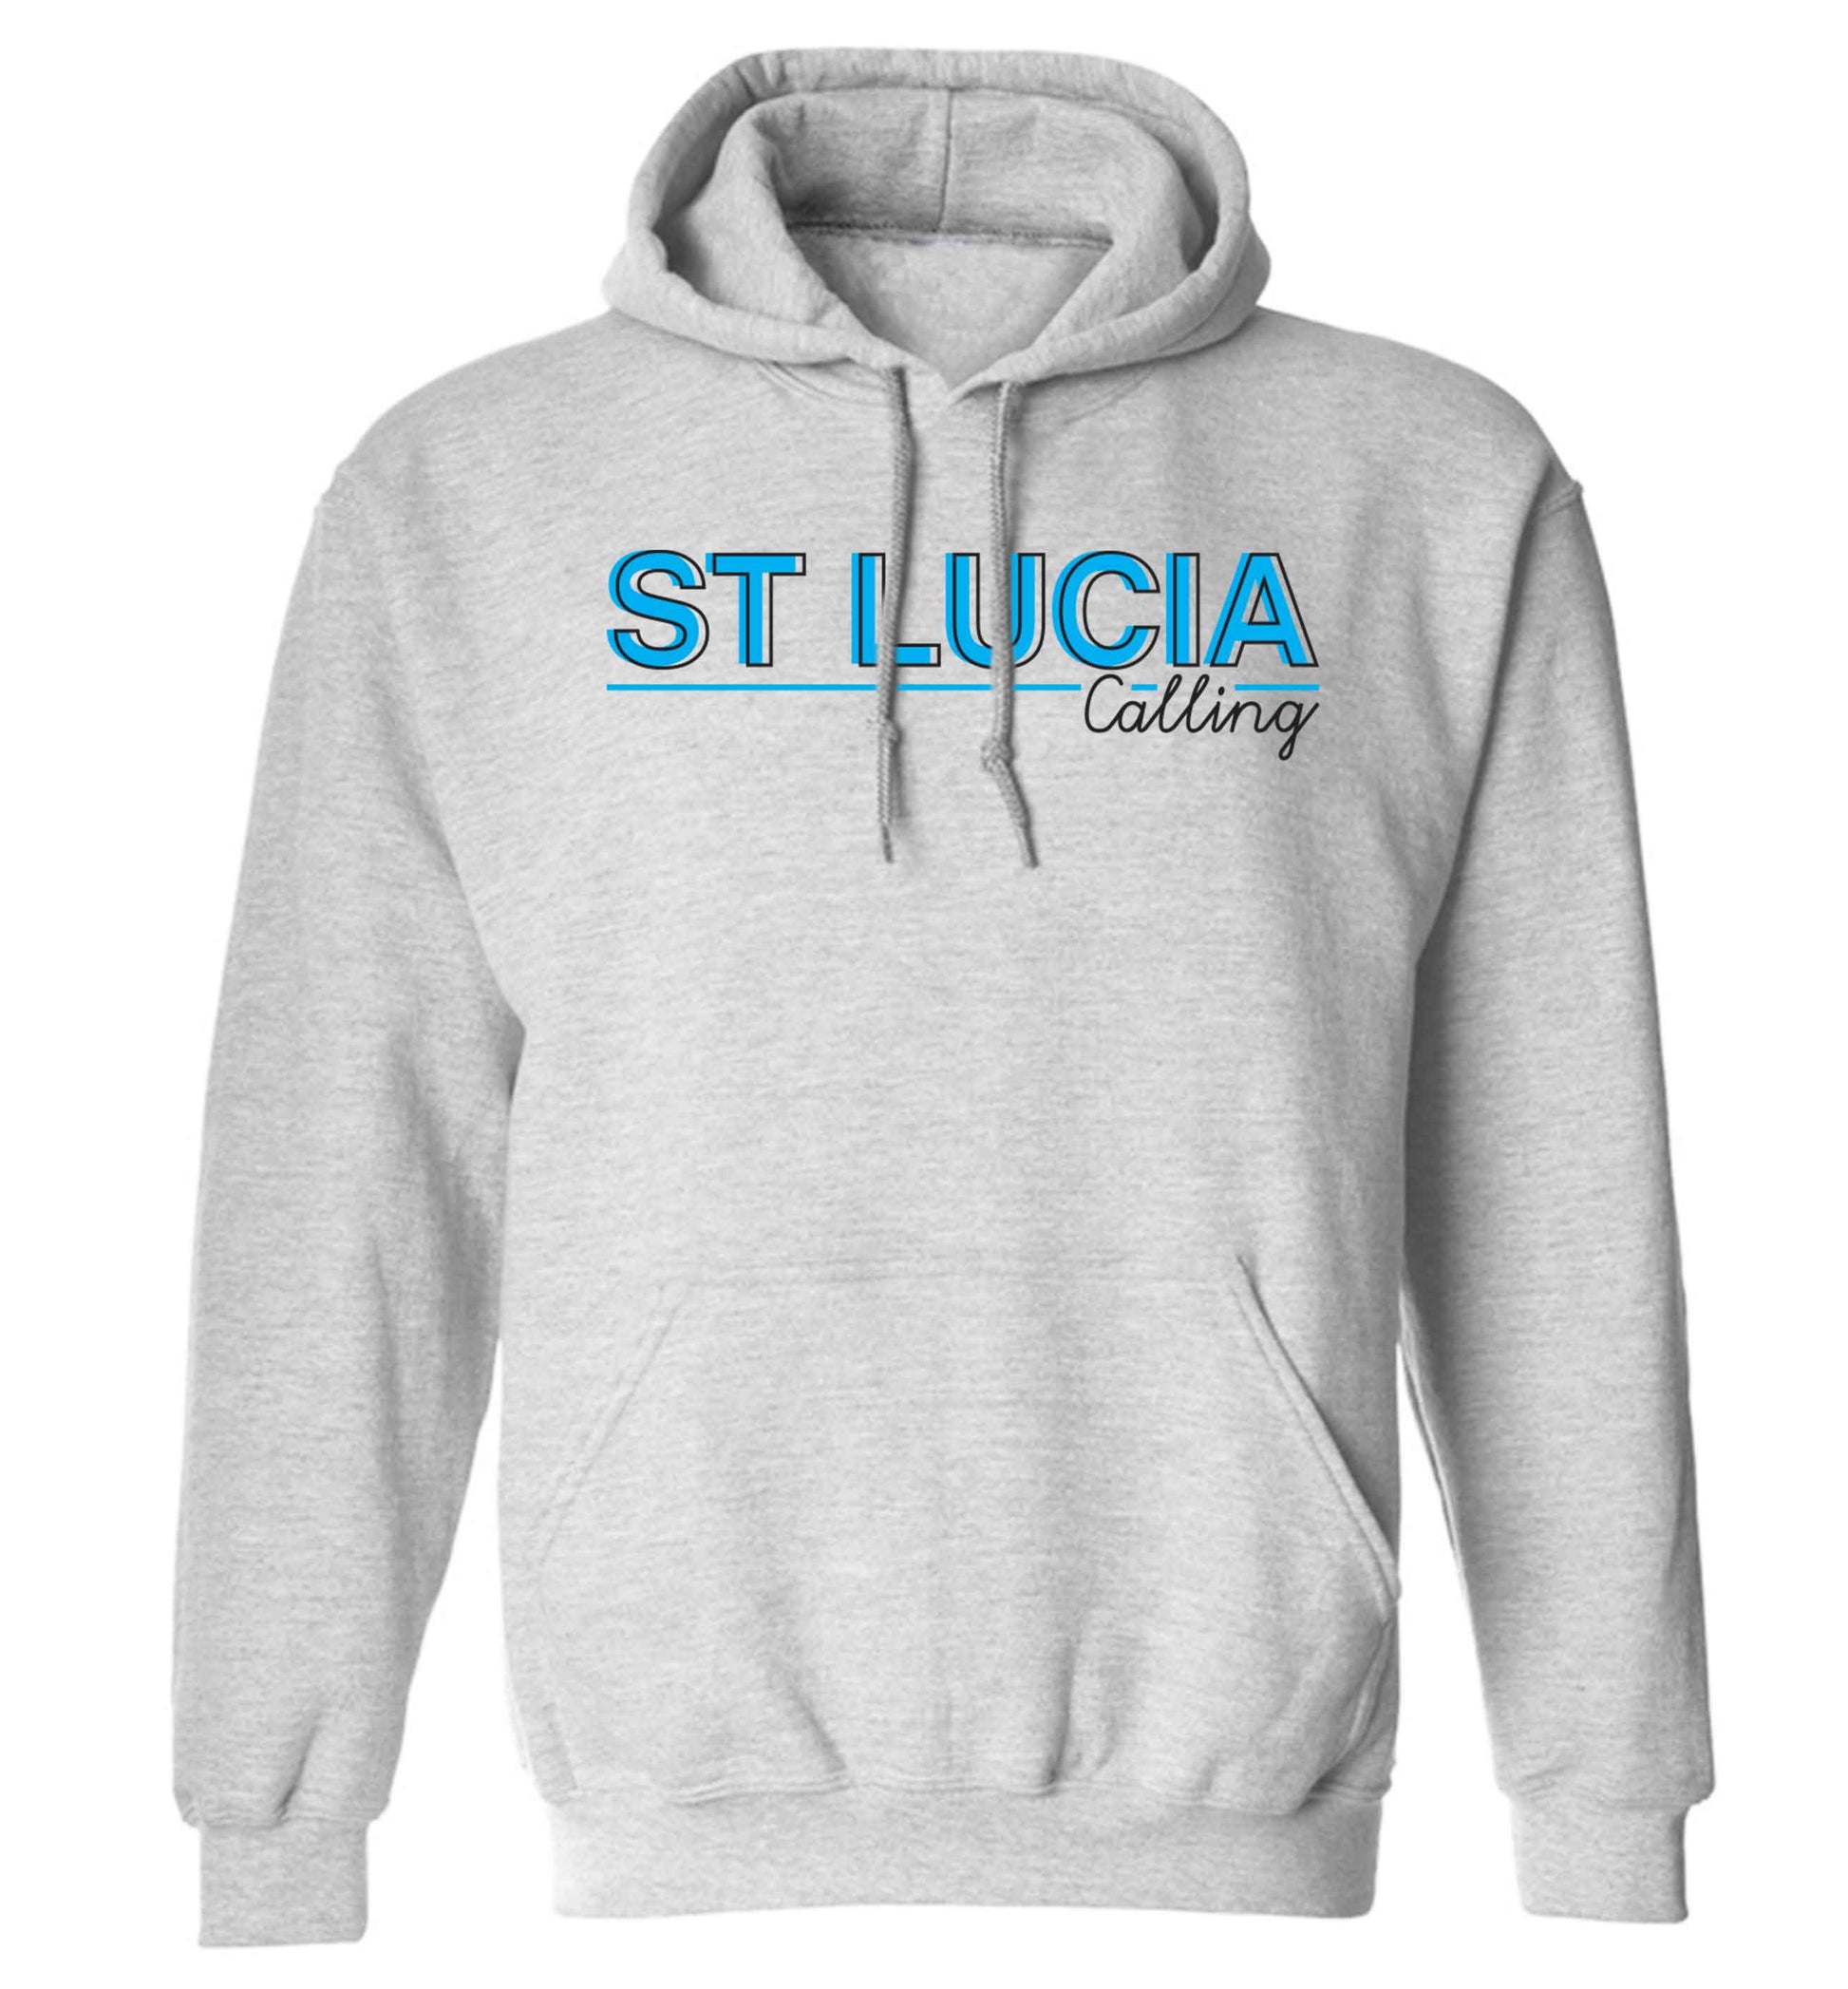 St Lucia calling adults unisex grey hoodie 2XL